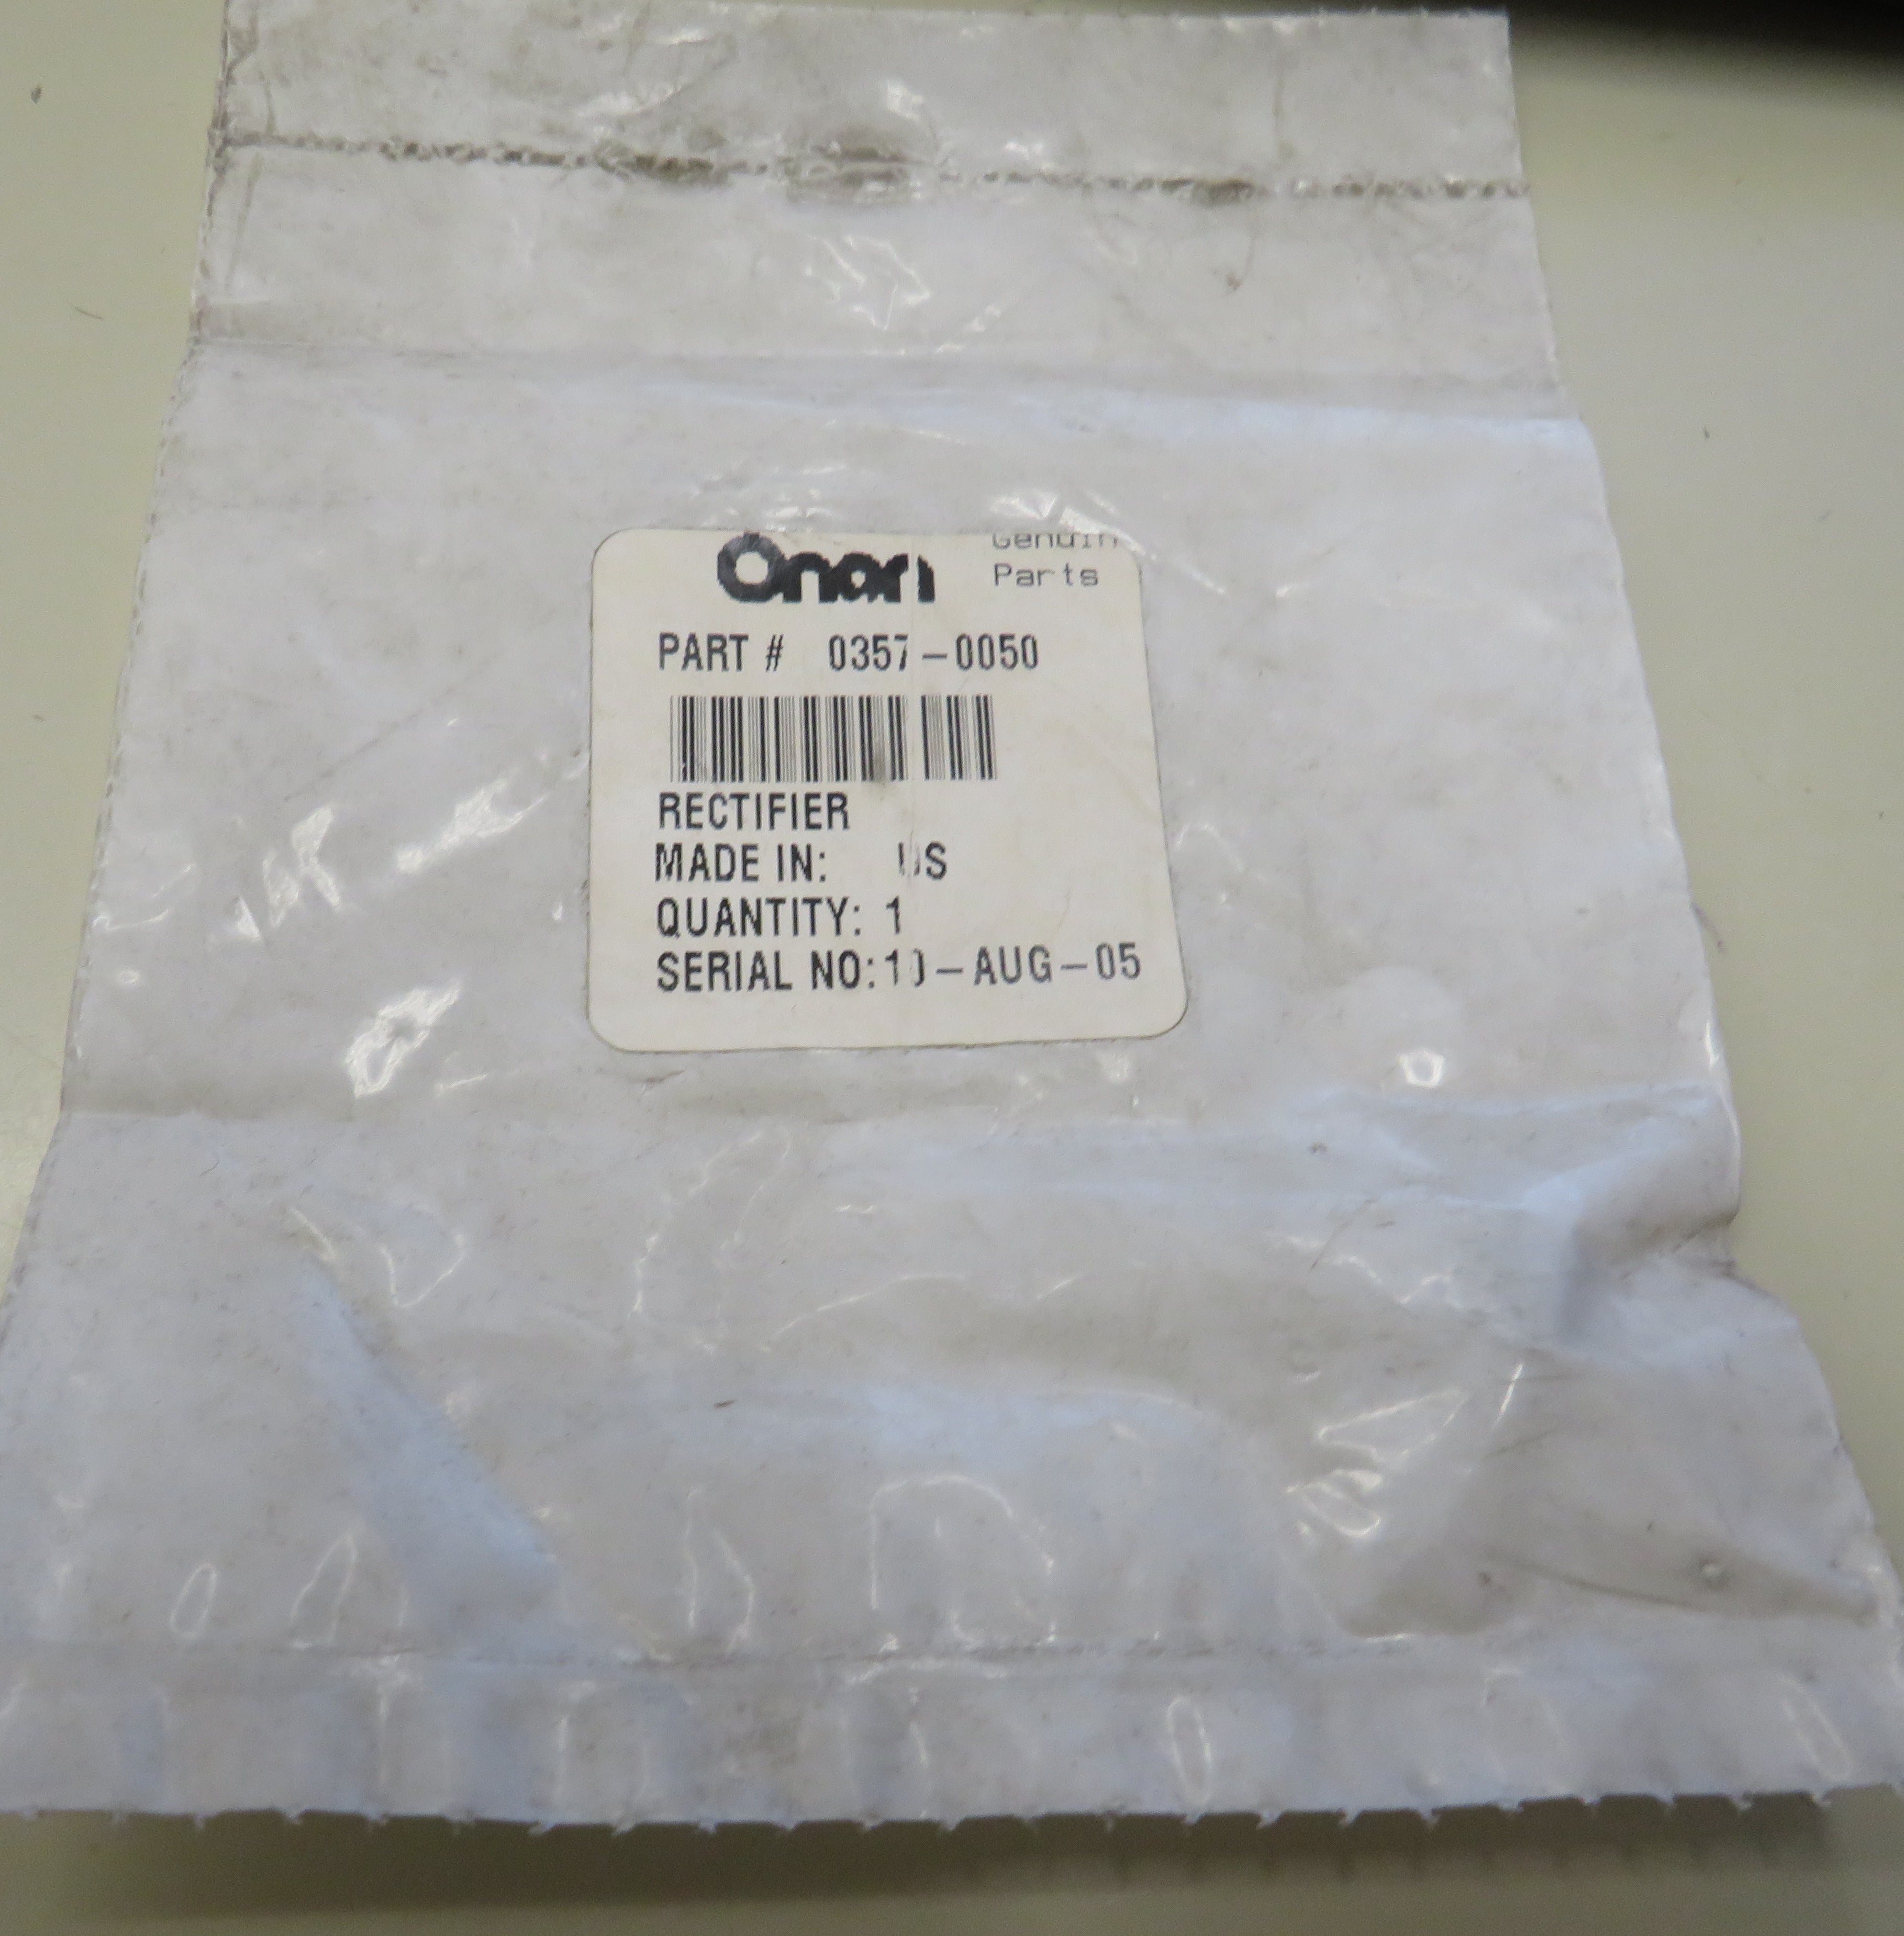 357-0050 Onan Rectifier Silicon for Control on MDL4 Marine Gen Set (Spec A and B) 